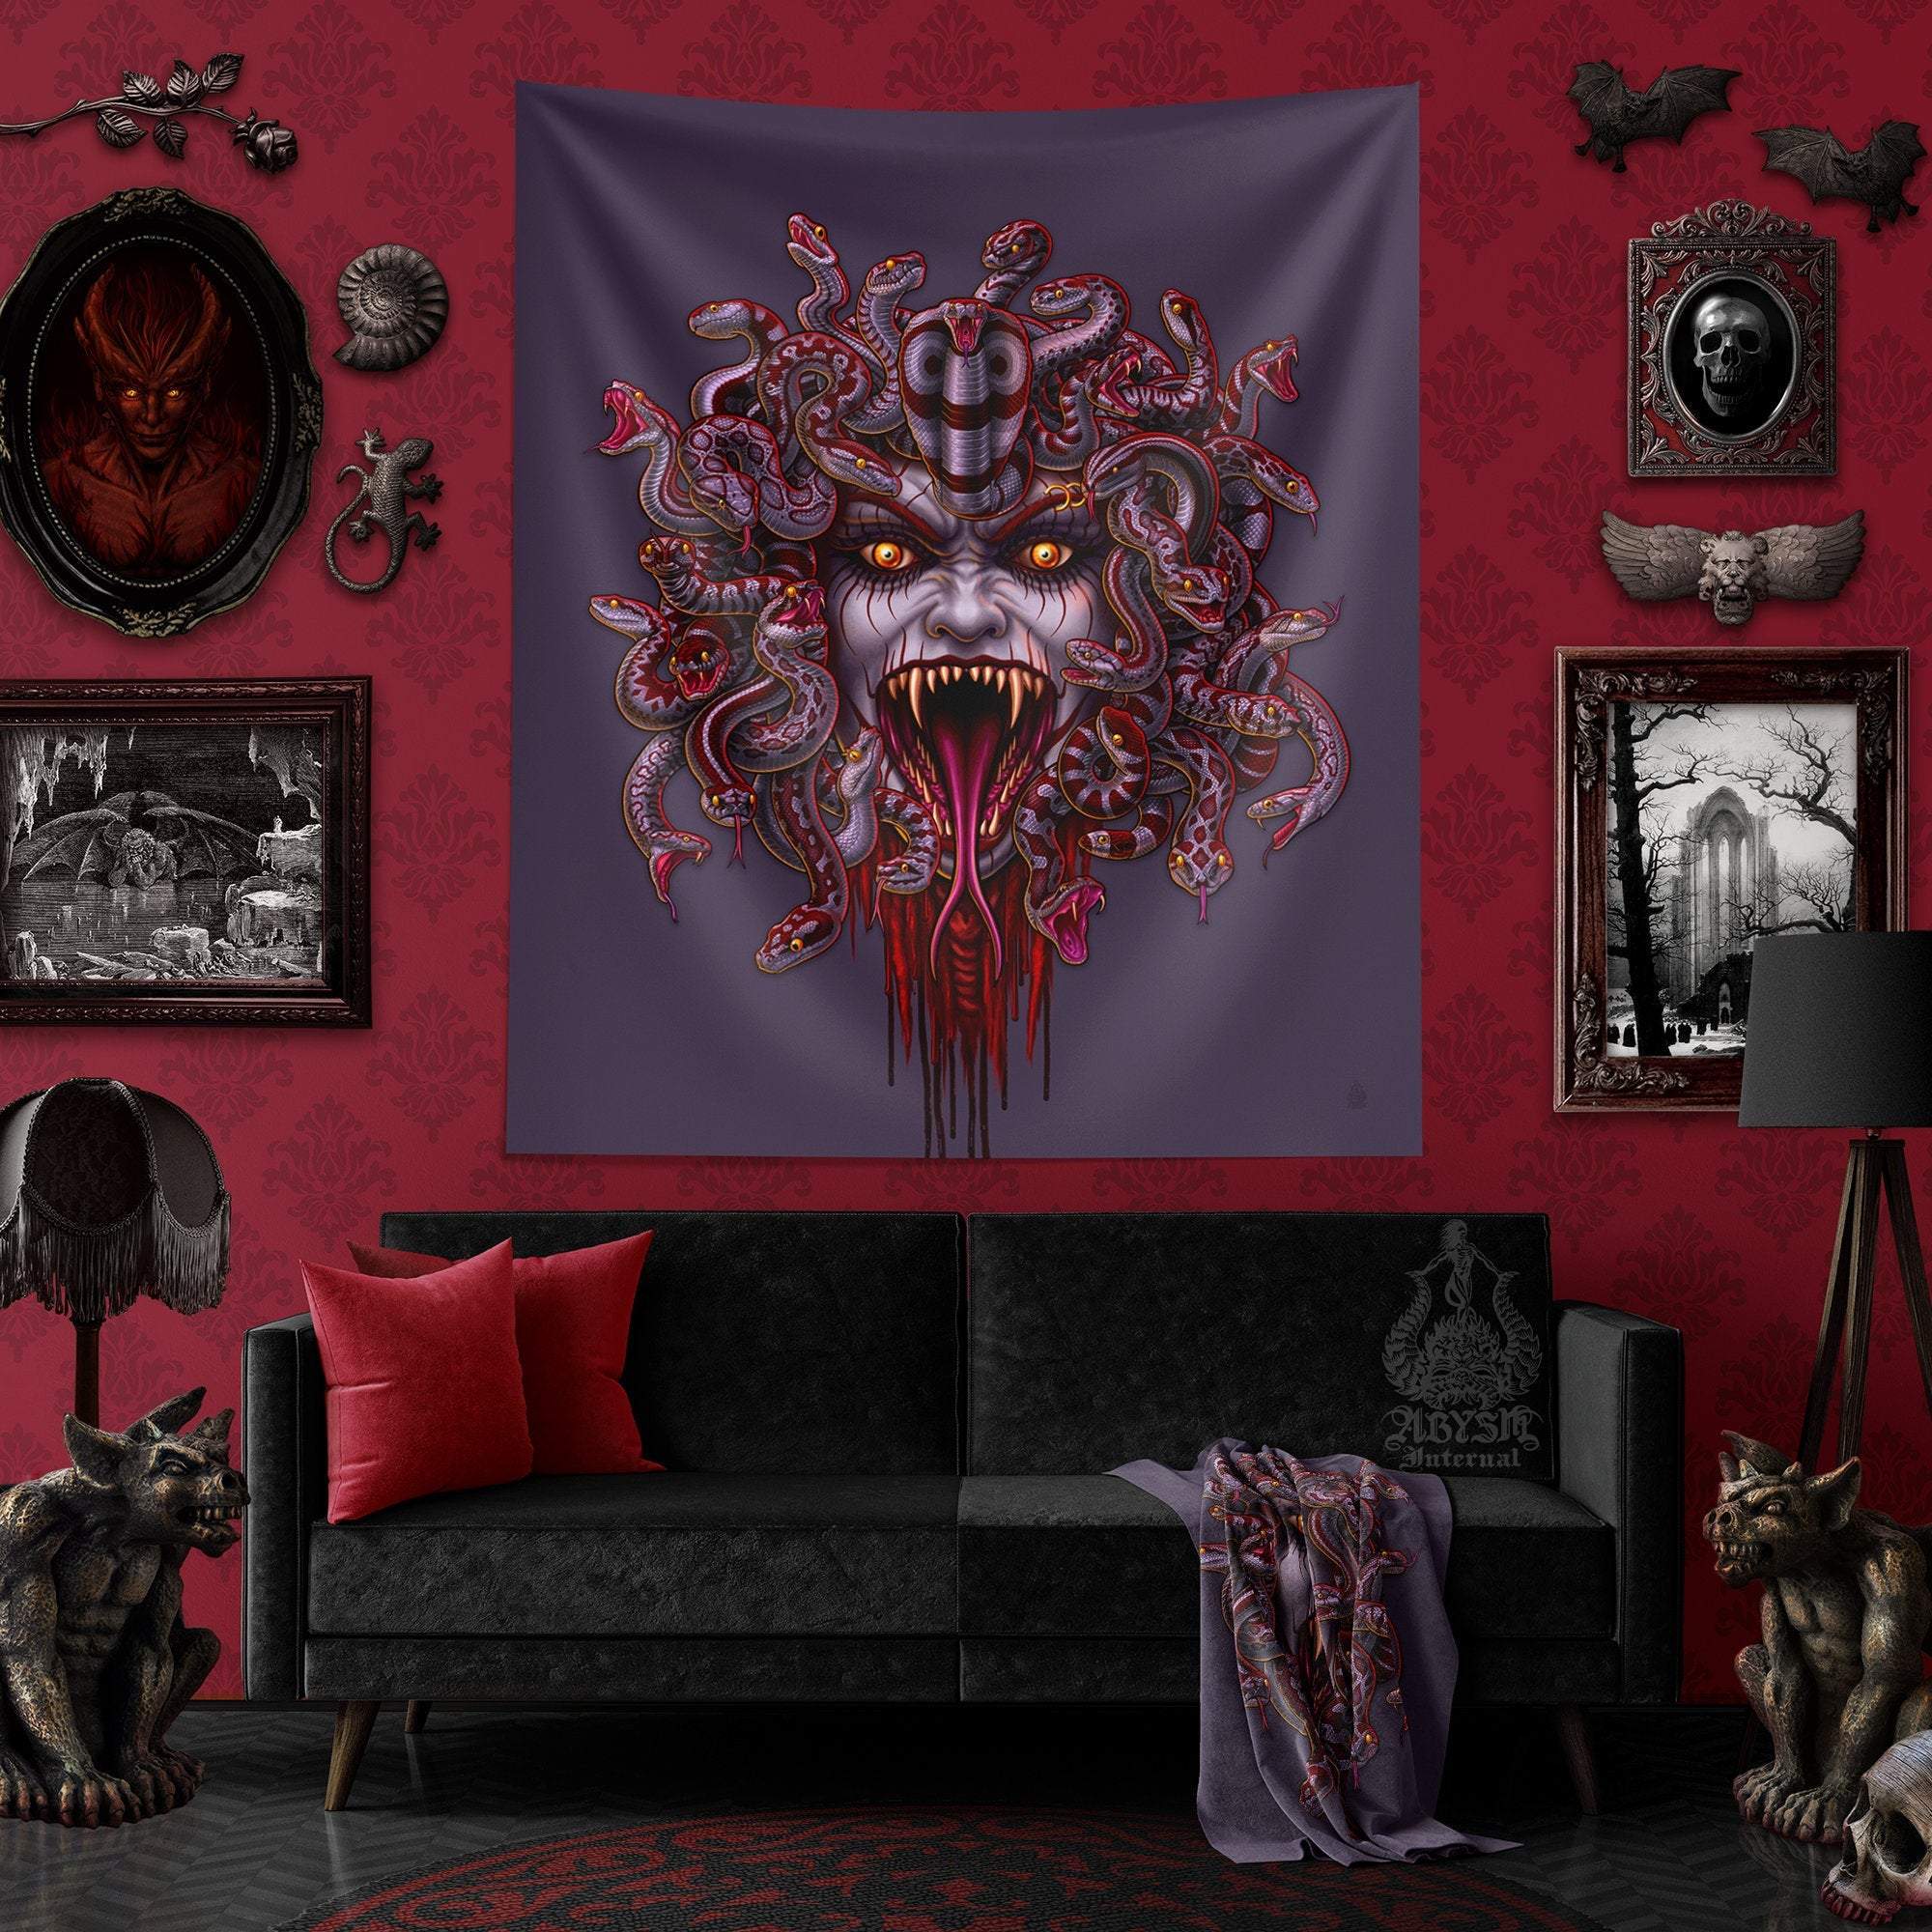 https://cdn.shopify.com/s/files/1/0584/5608/0574/products/medusa-tapestry-goth-wall-hanging-fantasy-home-decor-art-print-bloody-ash-grey-snakes-3-faces-abysm-internal-507062.jpg?v=1703028211